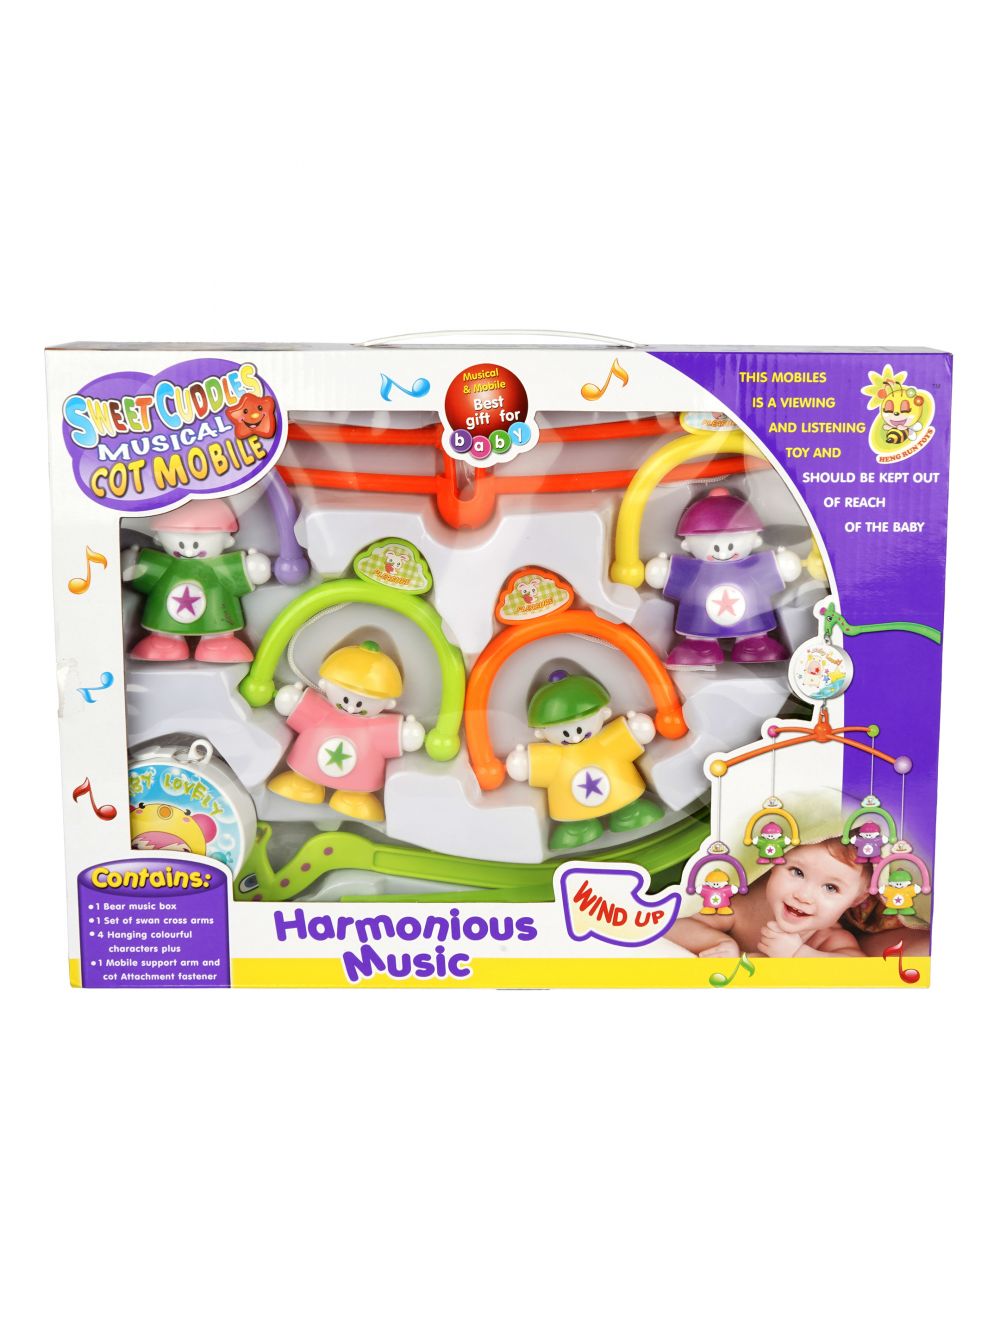 iBaby Sweet Cuddles Musical Cot Mobile With Harmonious Music Toy